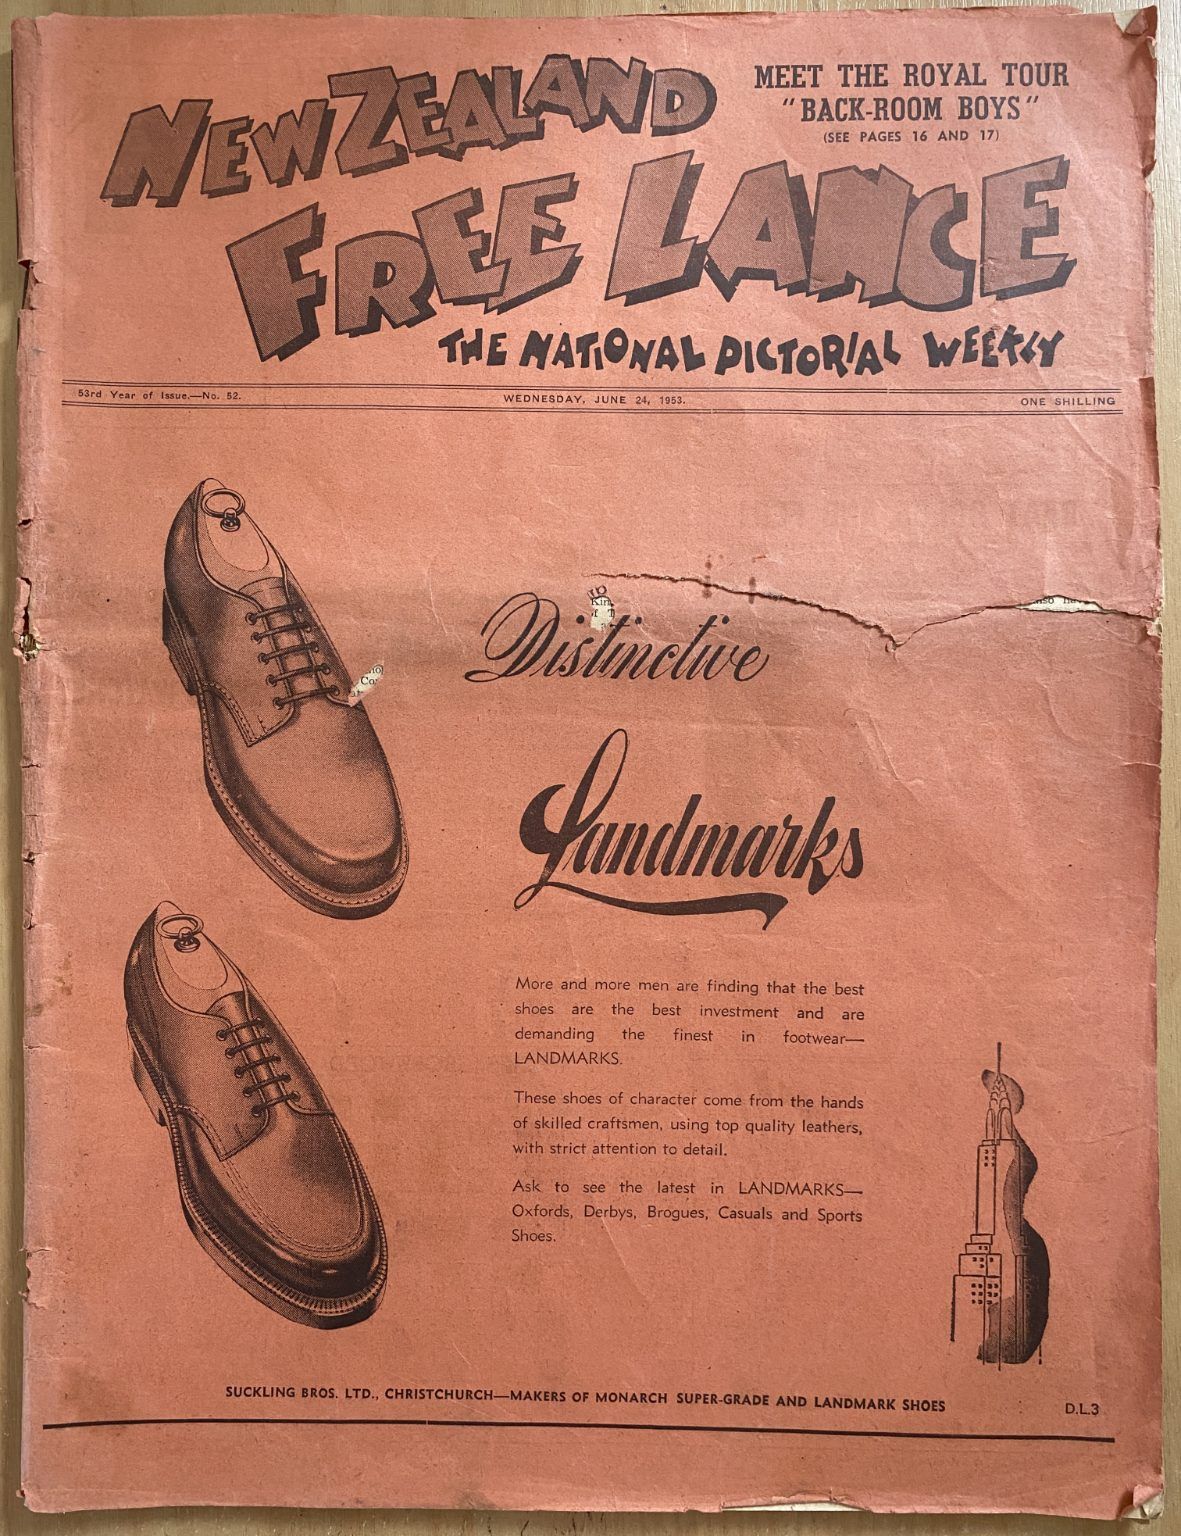 OLD NEWSPAPER: New Zealand Free Lance - No 52, 24 June 1953